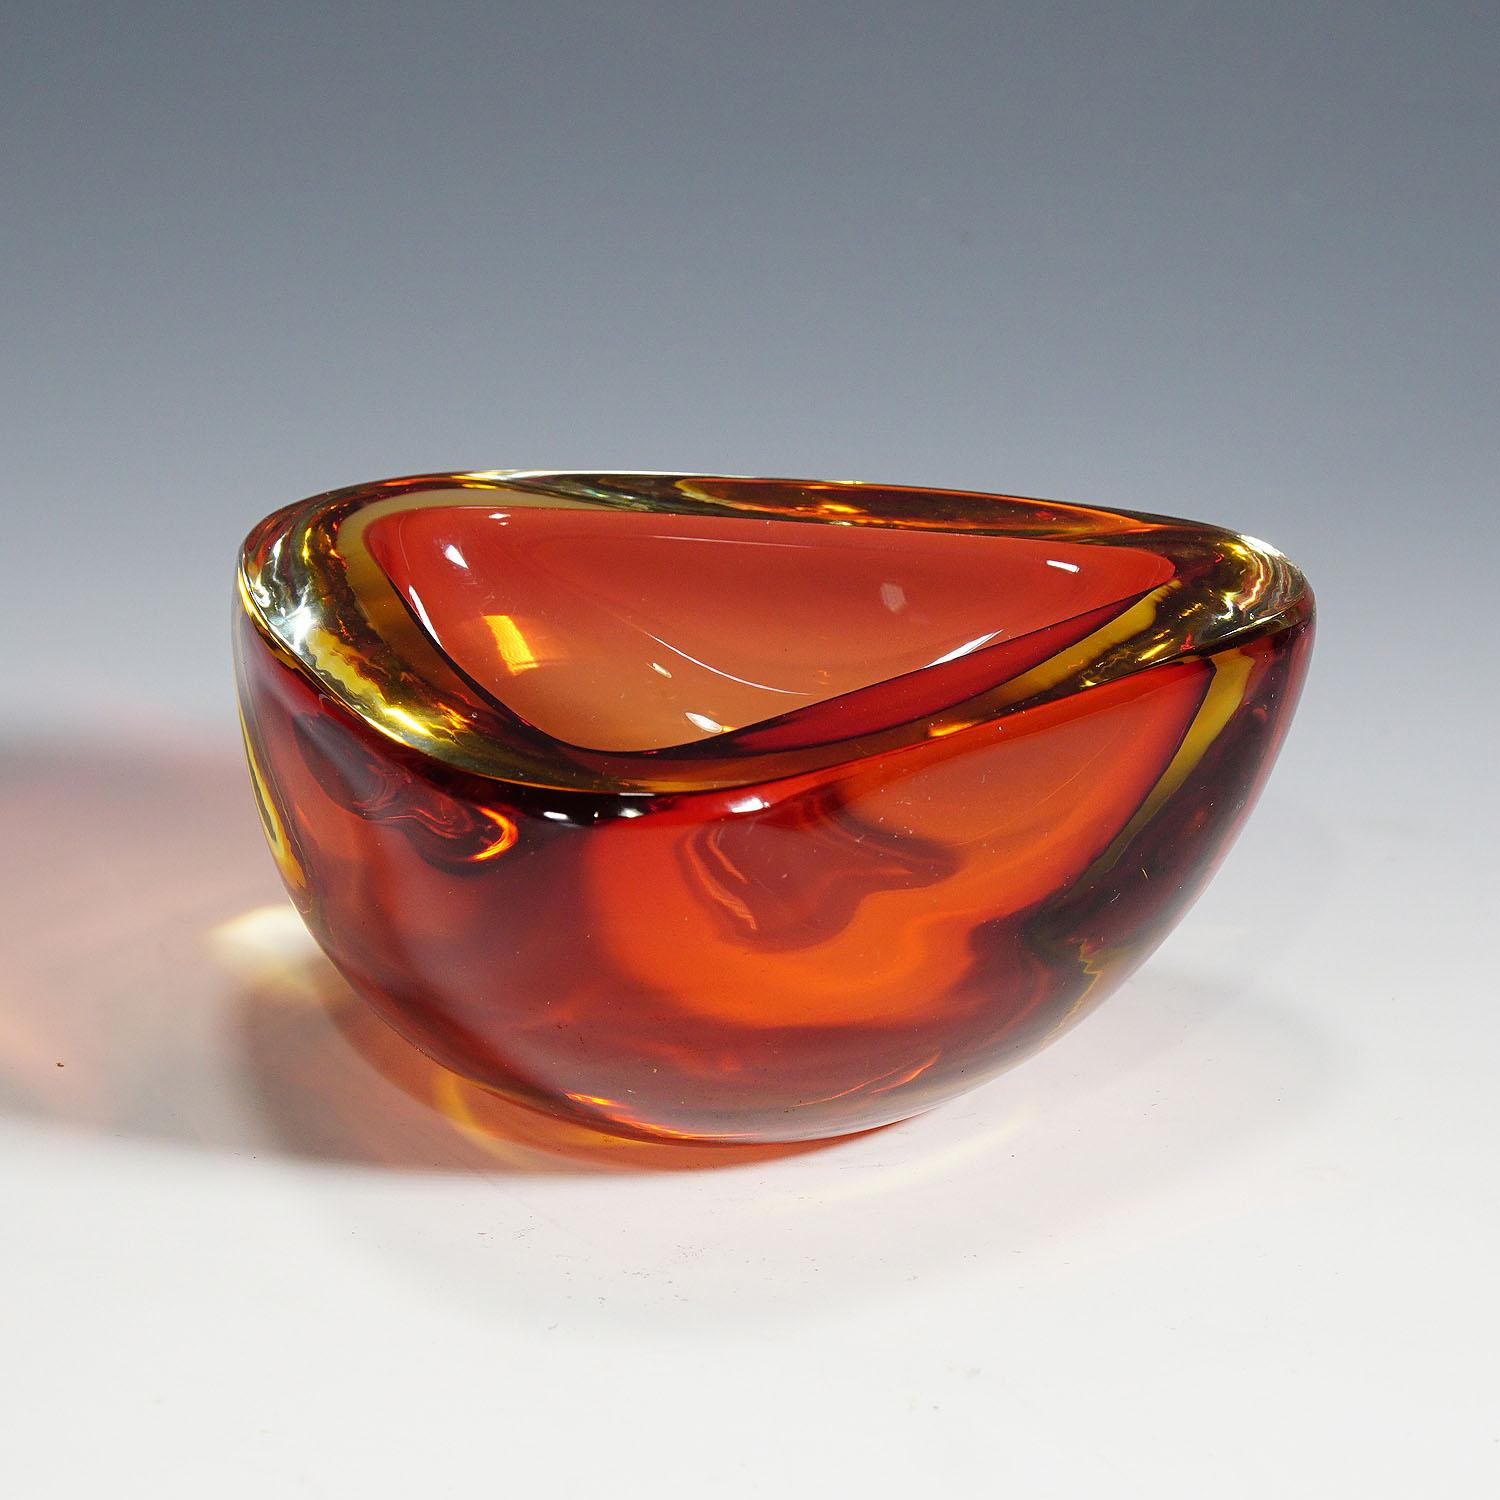 Heavy Seguso Vetri d'Arte (attr.) Sommerso Murano Art Glass Bowl

A triangular shaped vintage Murano art glass bowl. Most probably manufactured by Seguso Vetri d'Arte circa 1950s. Amber and yellow glass with thick clear glass overlay. A typical